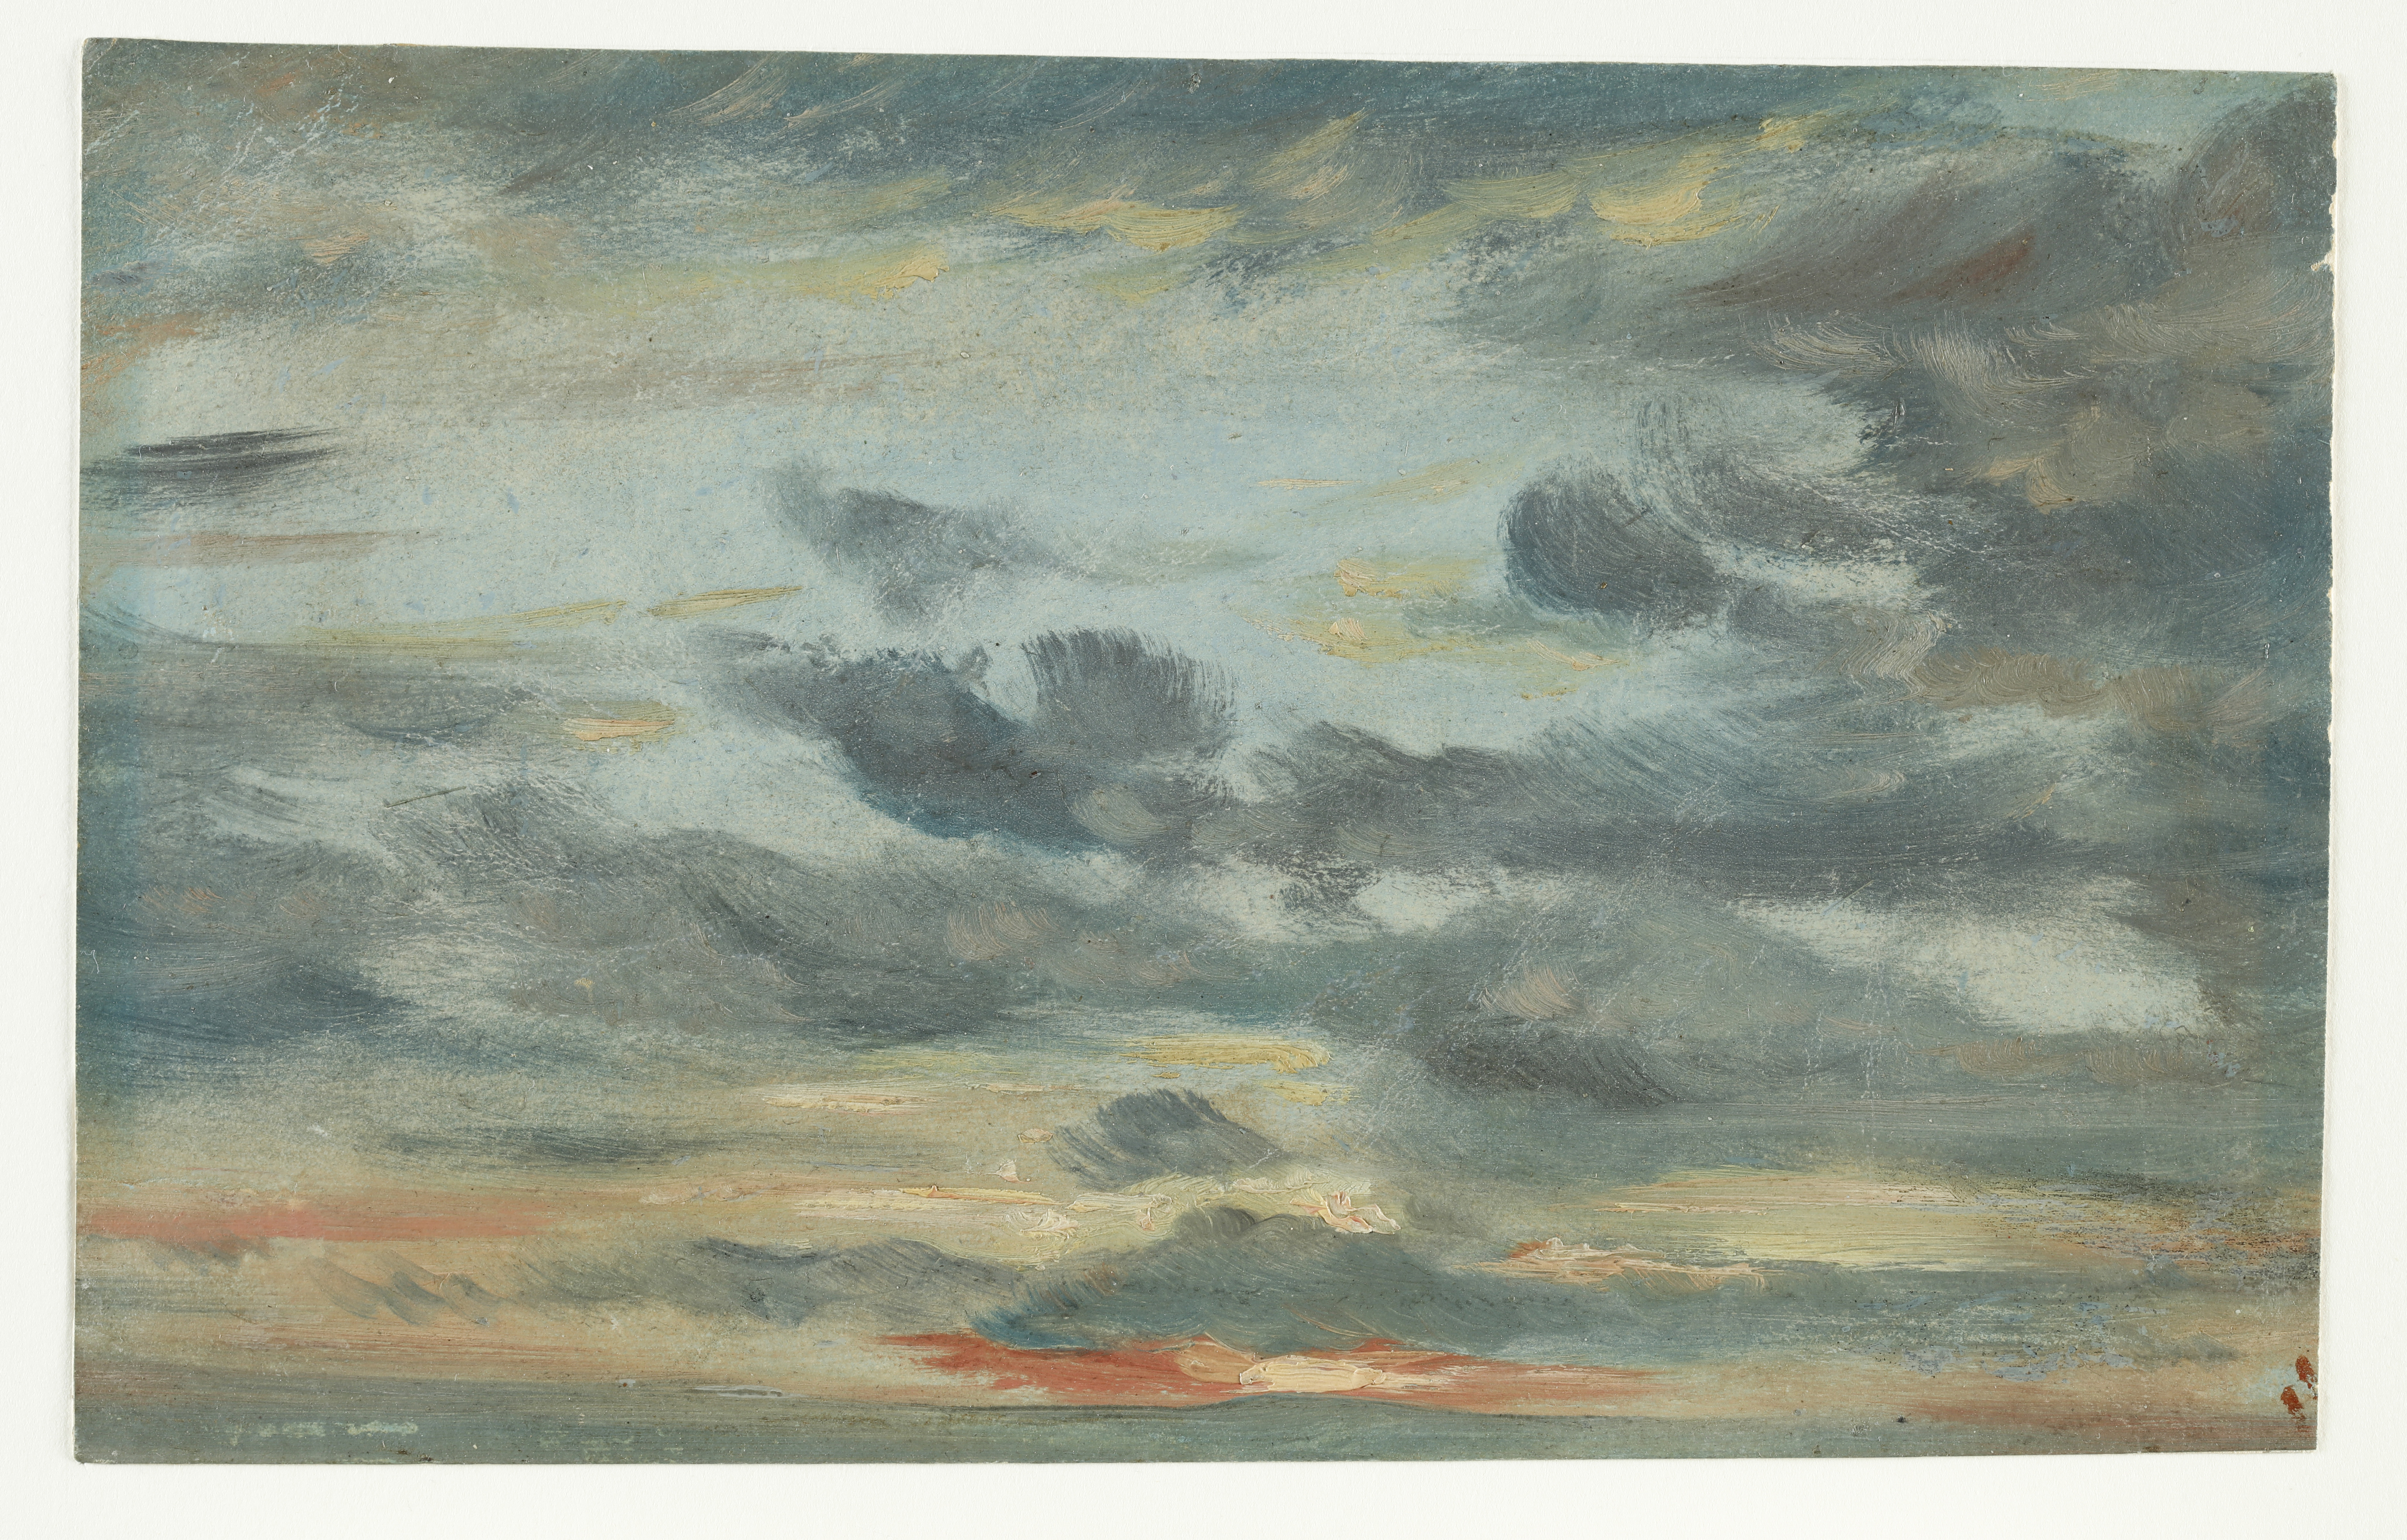 A sketch in oils on paper of a skyscape at sunset, with dark blue clouds and red-orange sunset over a pale blue background.